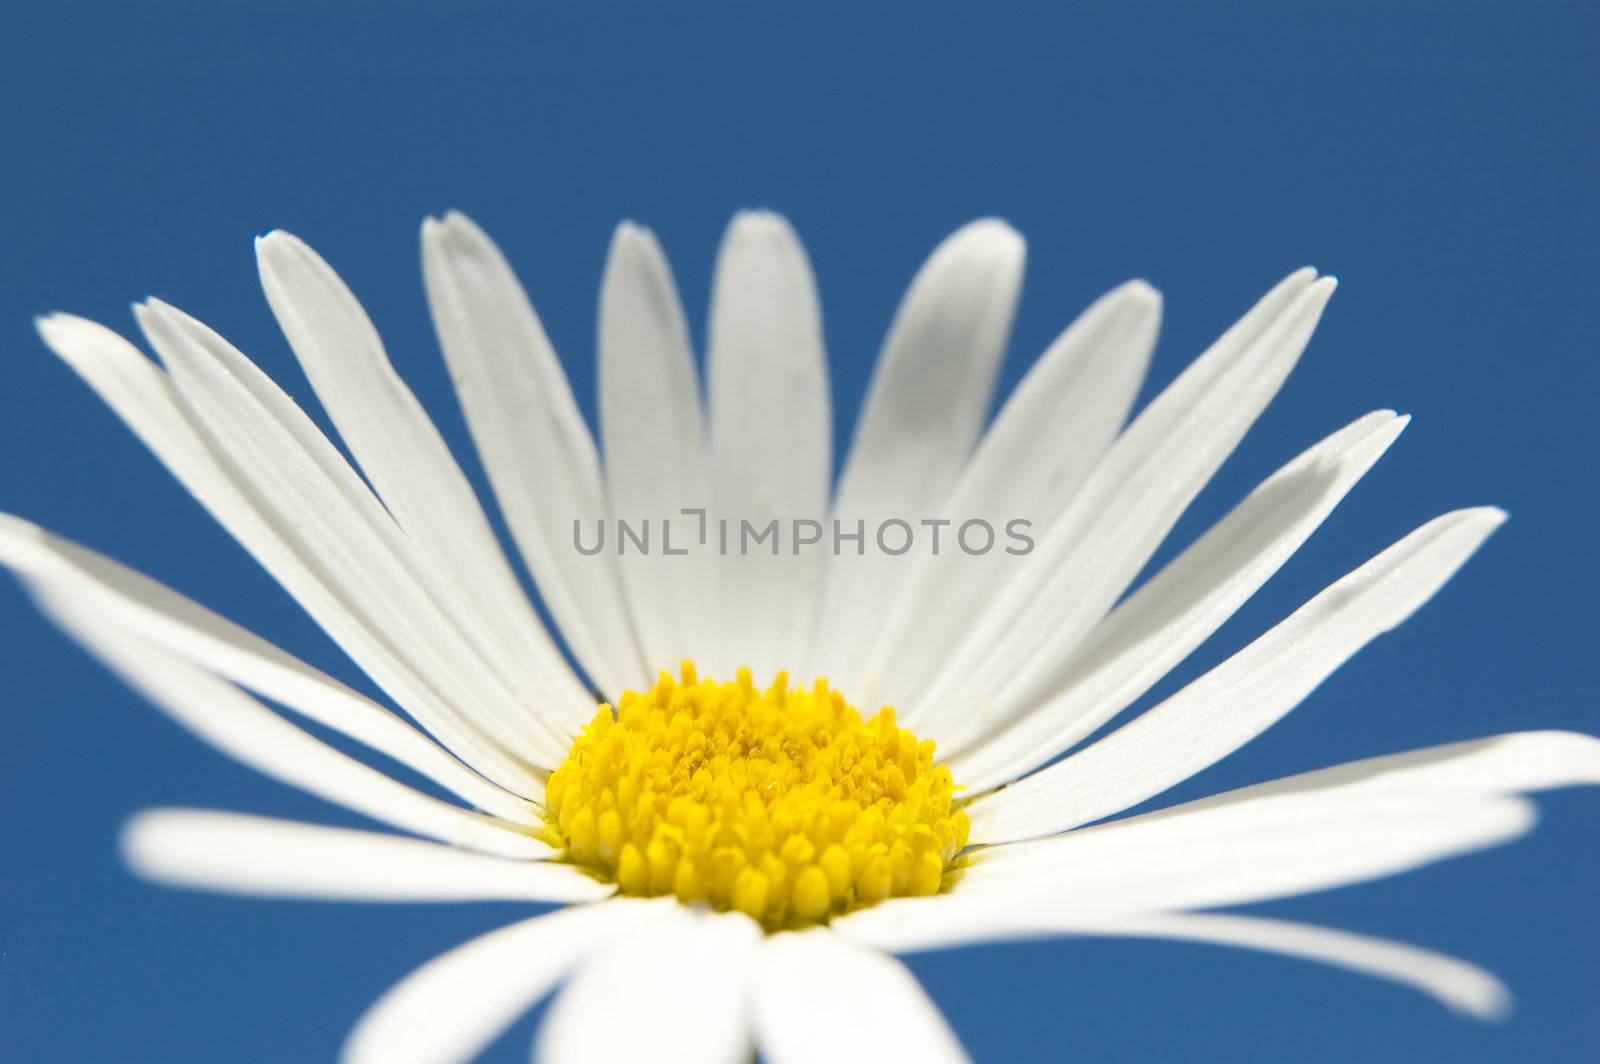 A white daisy in the sky